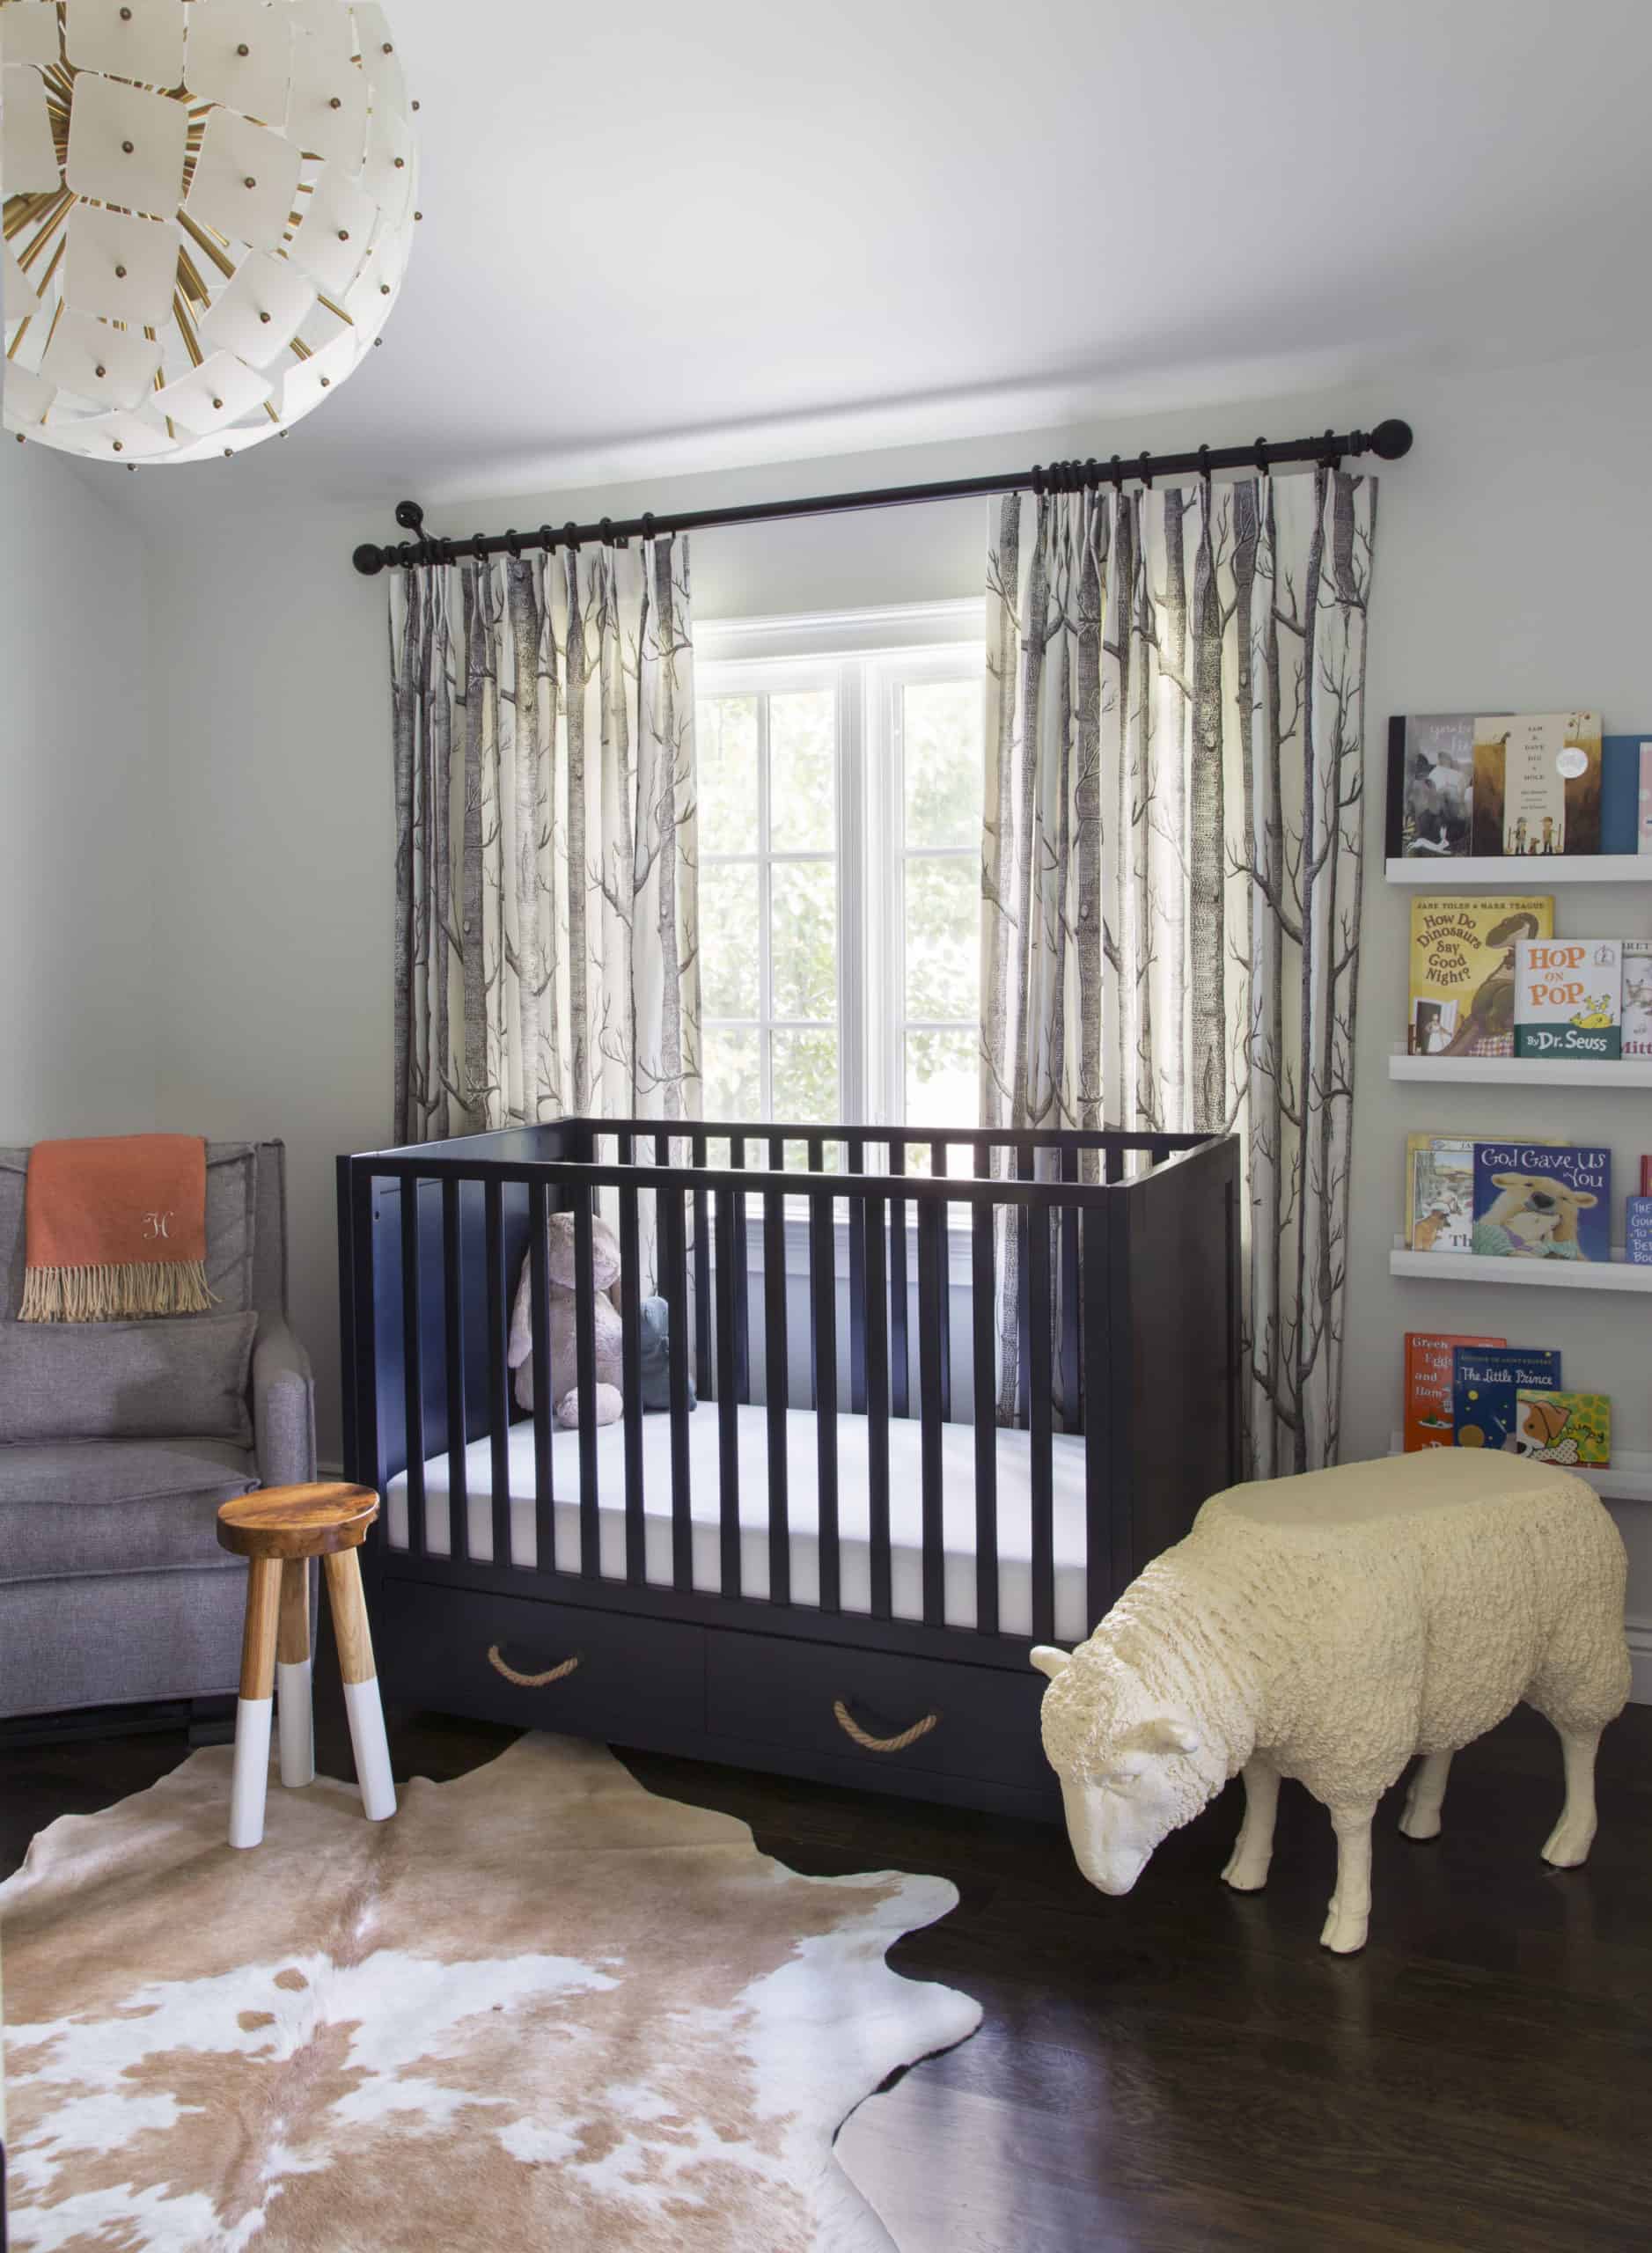 Nursery Furnishings with Sheep table and unique lighting